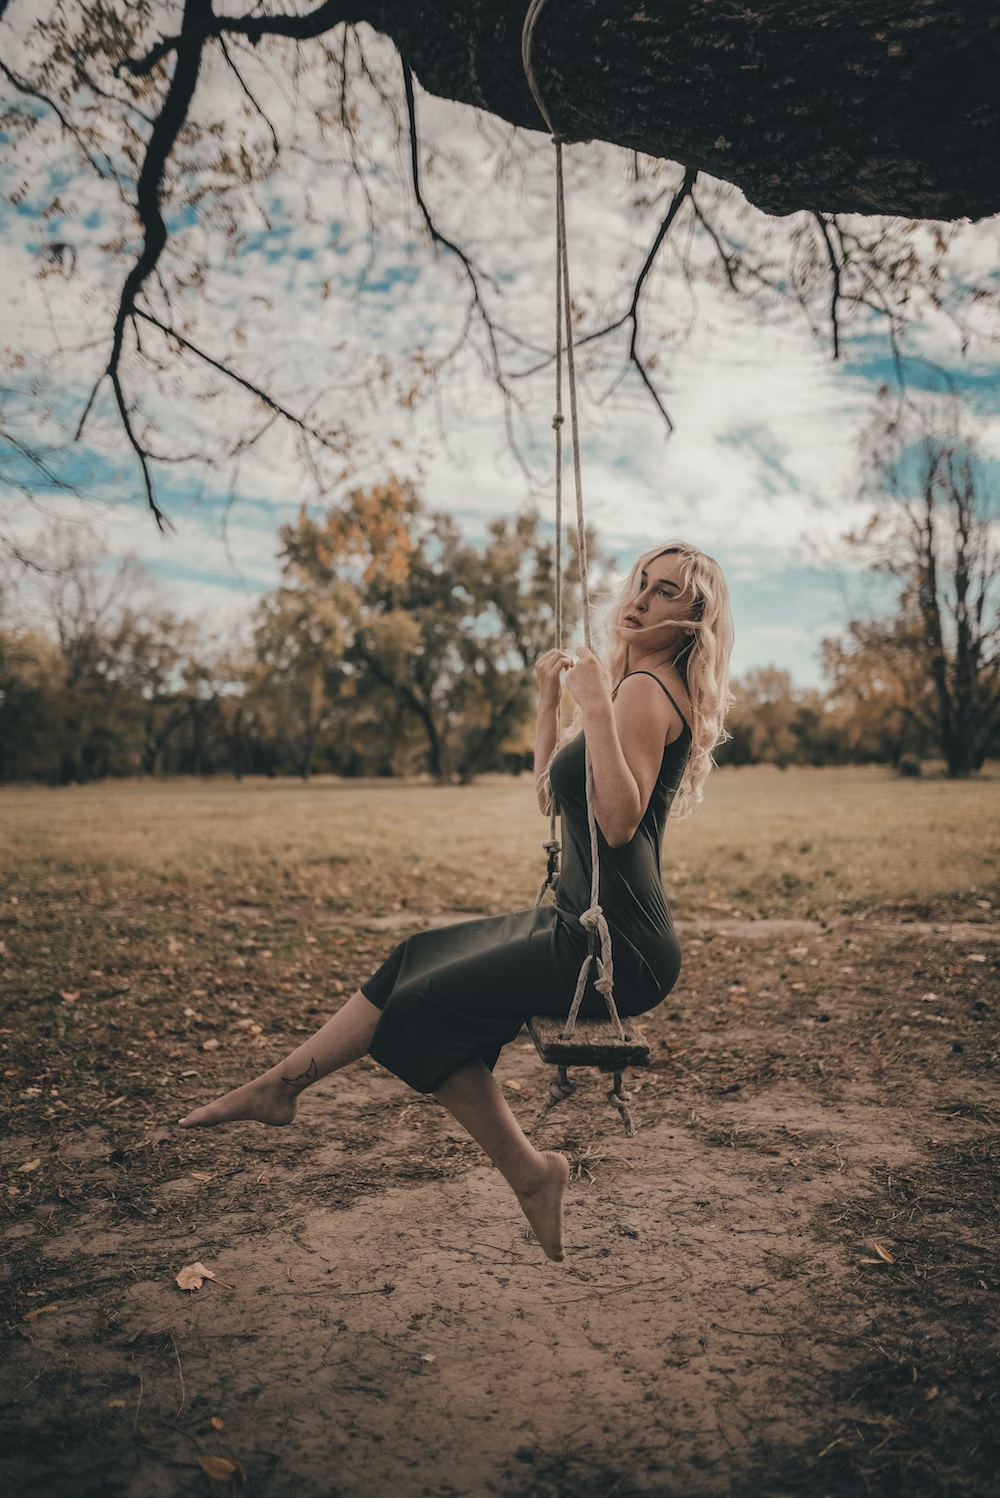 Woman on Swing In The Fall